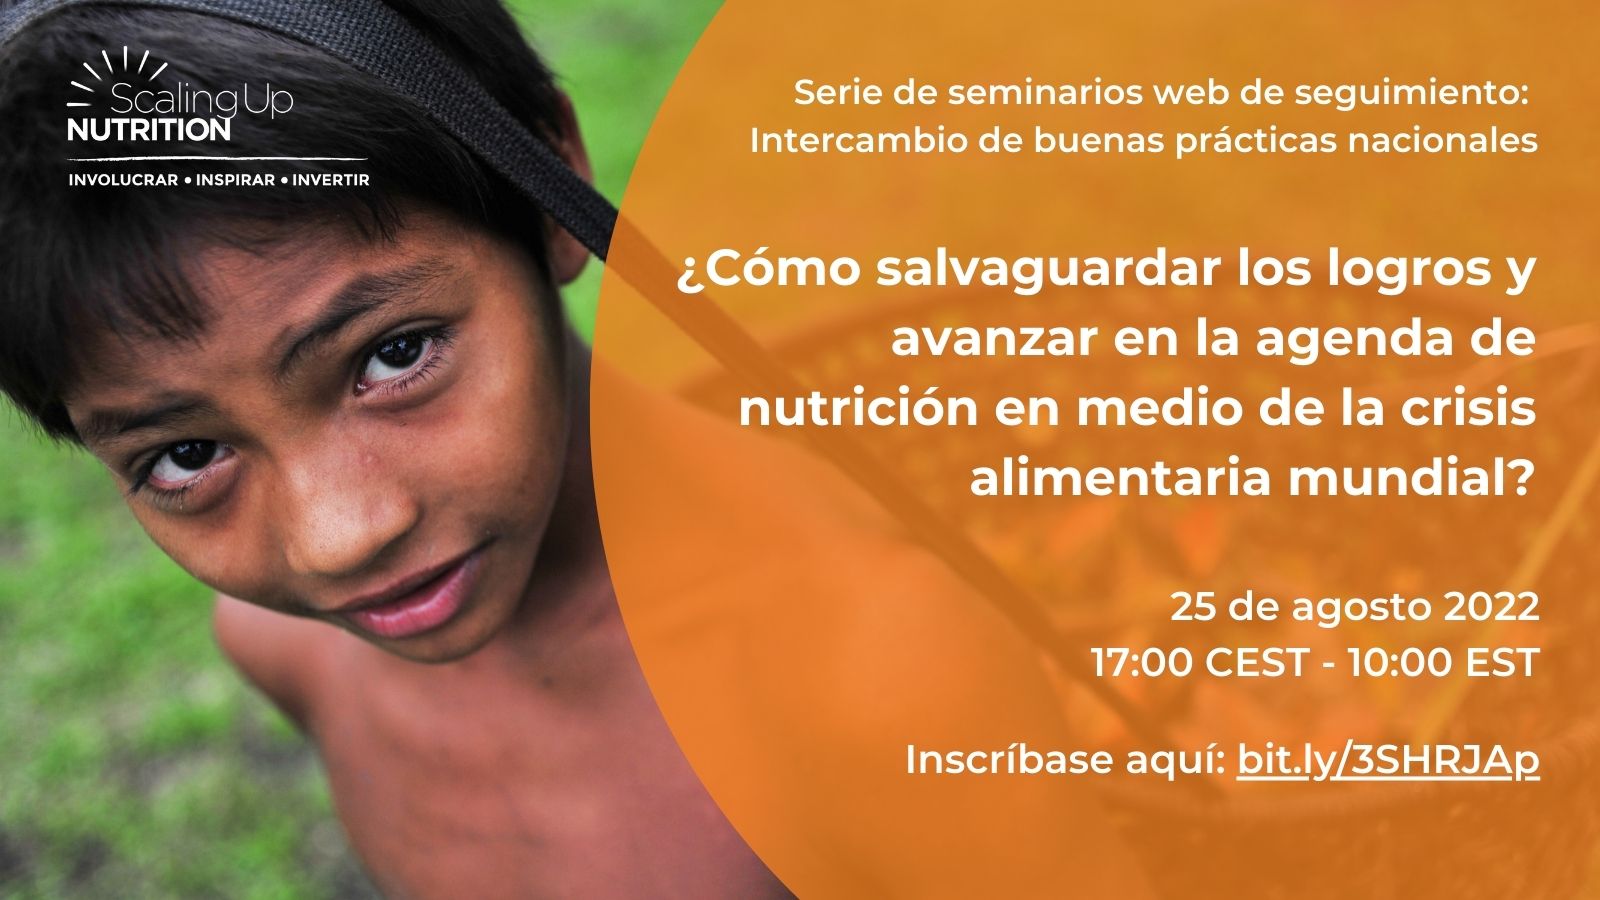 Latin America and Caribbeans: Sharing National Good Practices -   How to safeguard the nutrition gains and further advance the nutrition agenda in the midst of the global food and nutrition security crisis?